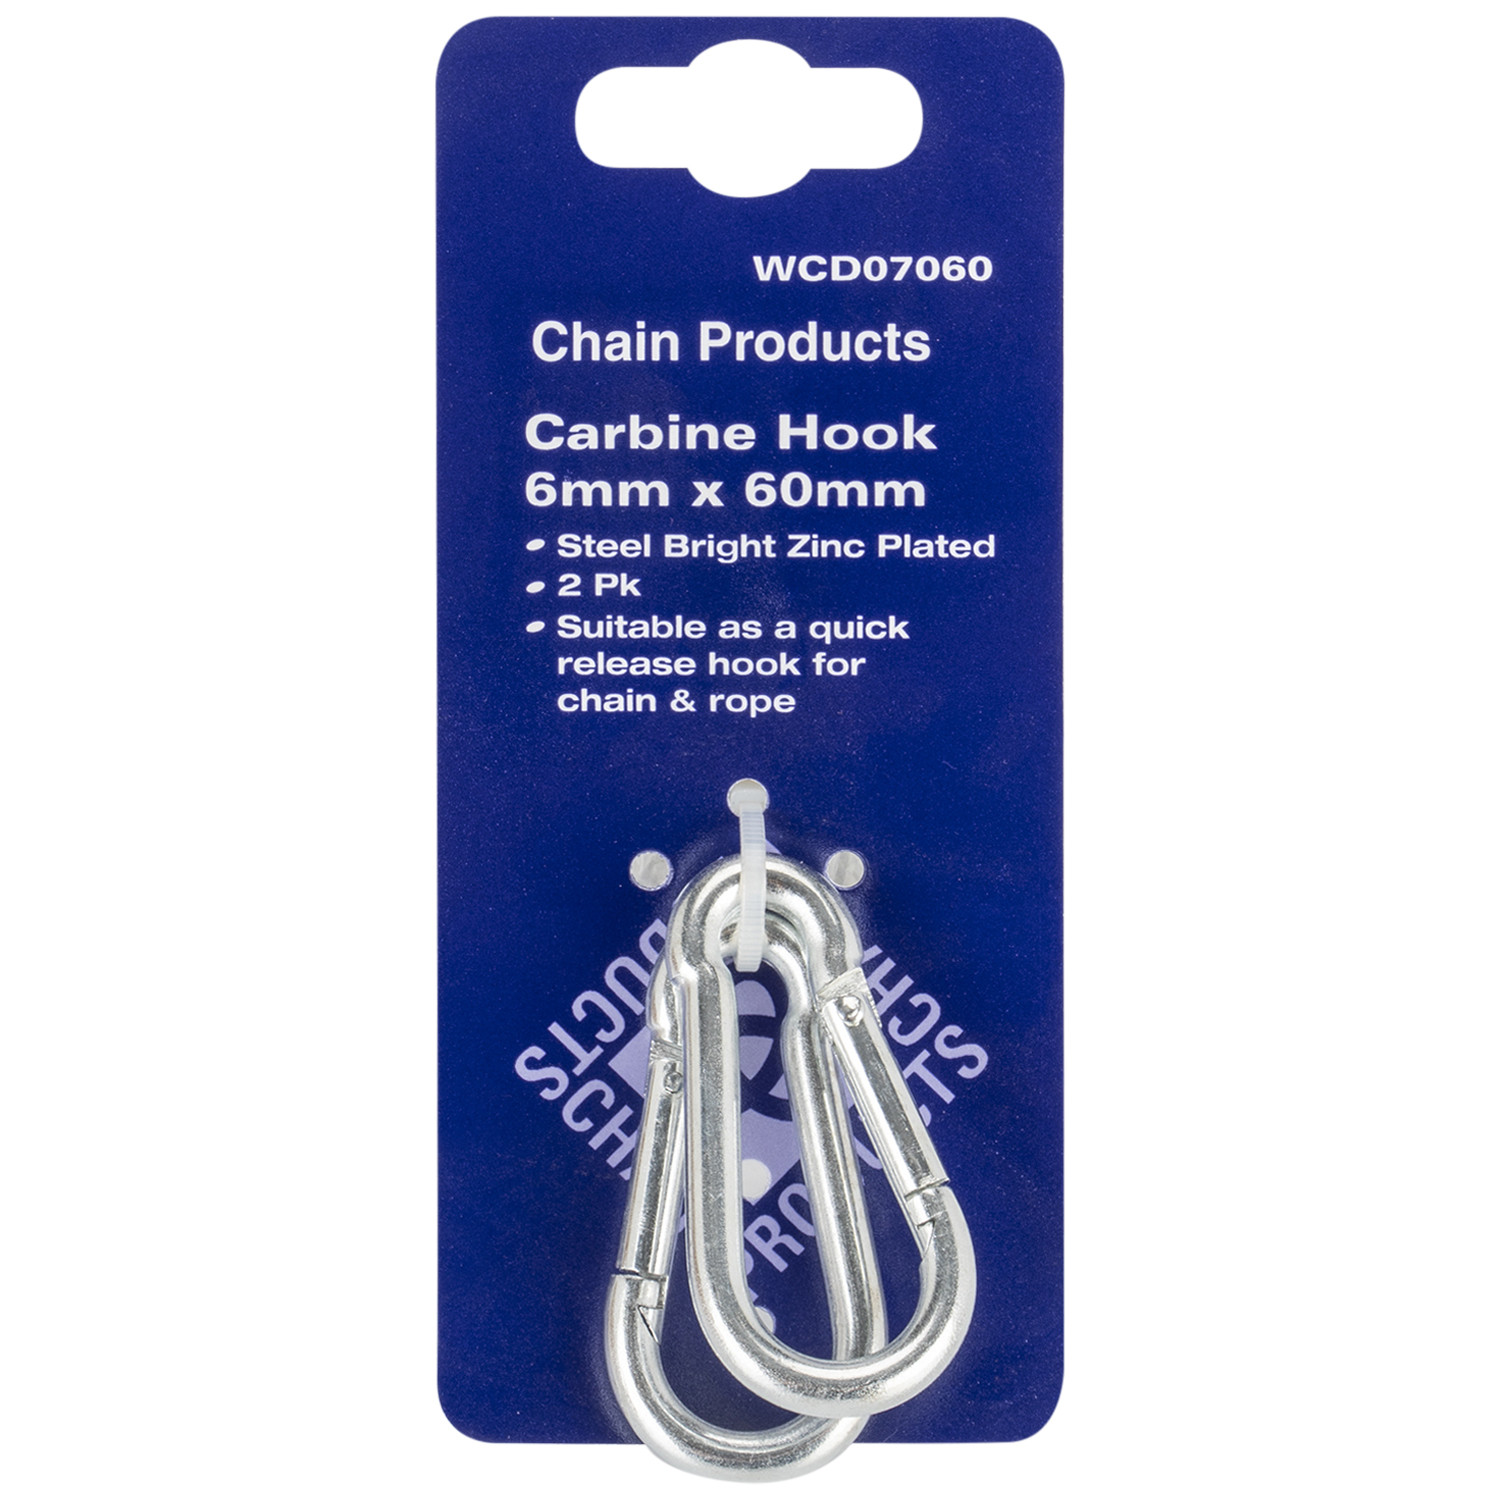 Chain Products 60mm Carbine Hook Image